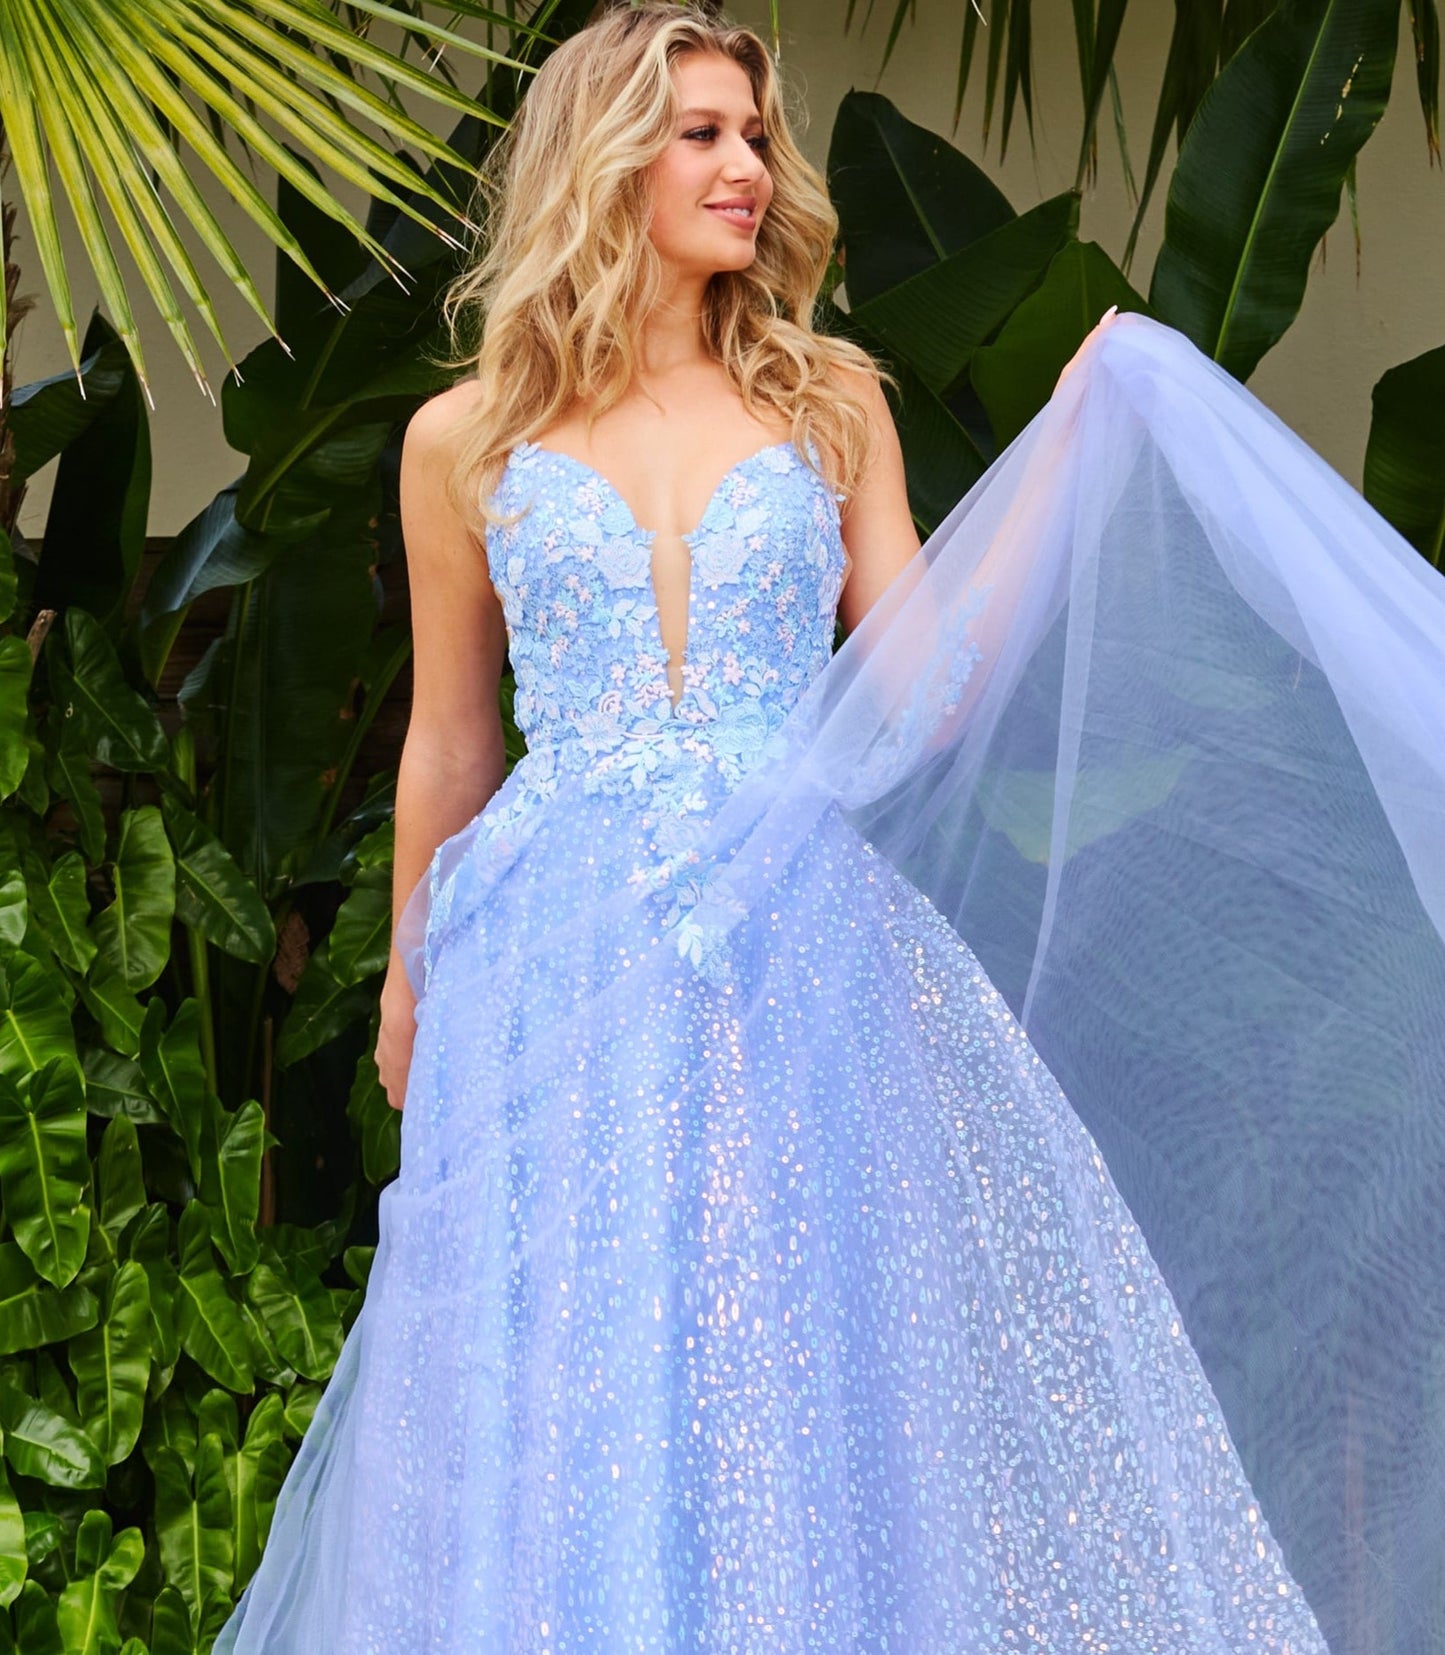 JVN07252A_FRONT-perriwinkle-blue-prom-dress-A-Line-sparkleJVN07252 Periwinkle Prom Dress.  Do you love flowers and periwinkle?  Then this prom dress is for you.  It is an A line dress with sequin underlay long skirt.  The bodice has a low v neckline with sheer courtesy panel.  The bodice is covered in floral appliques that stream down the dress.  Available color:  Periwinkle  Available sizes:  00-24 